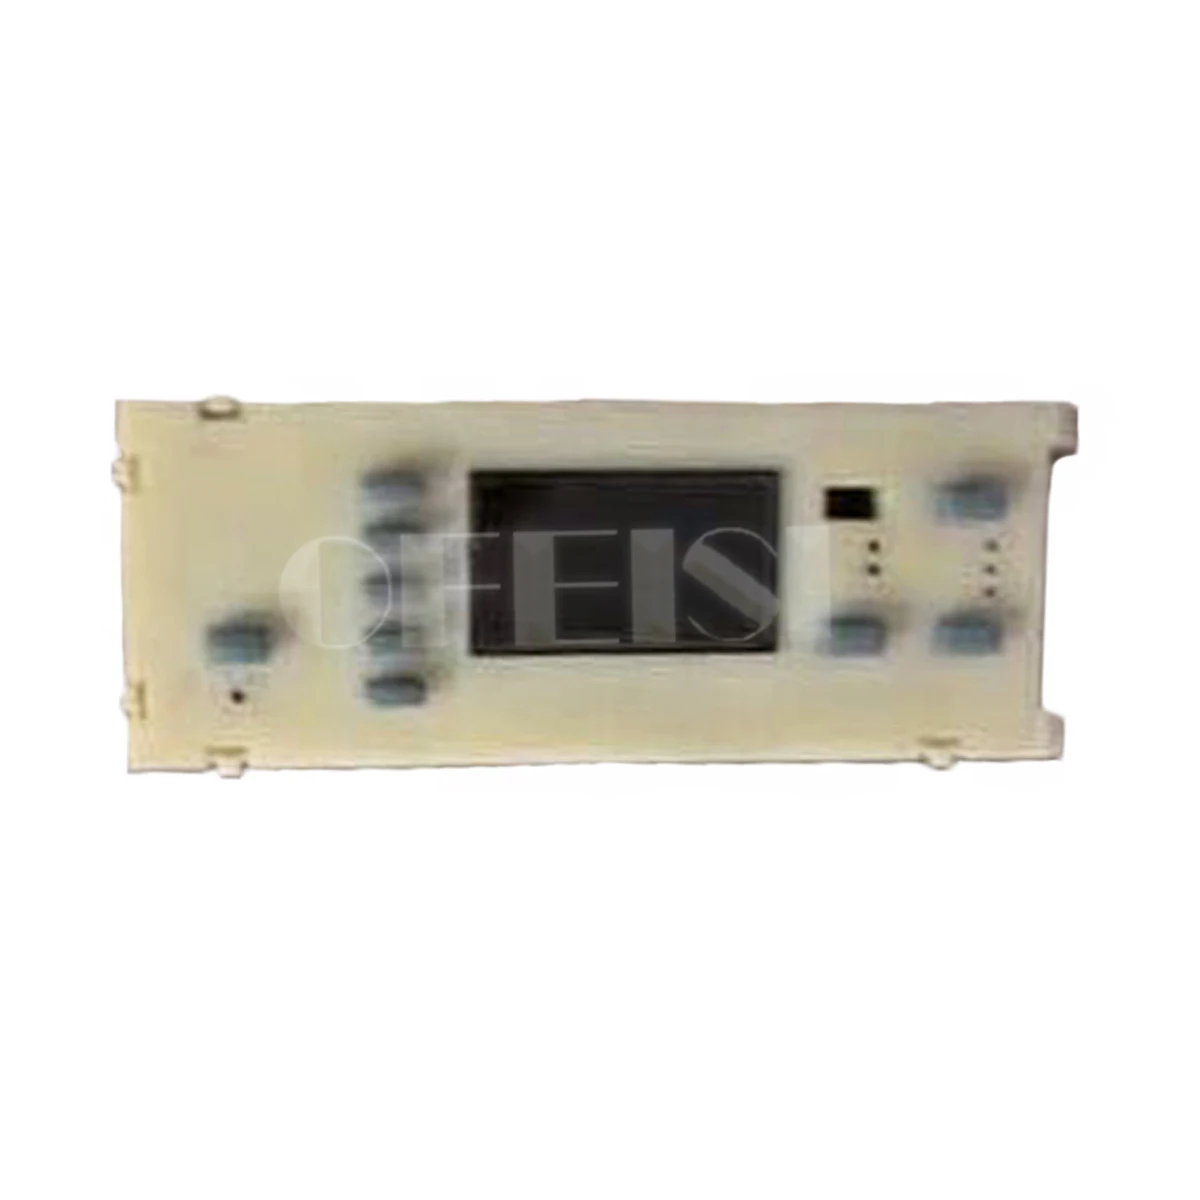 

Original 95% New Plotter for HP 5000 5500 5100 Panel Dispaly Control panel assembly C6090-60111 parts